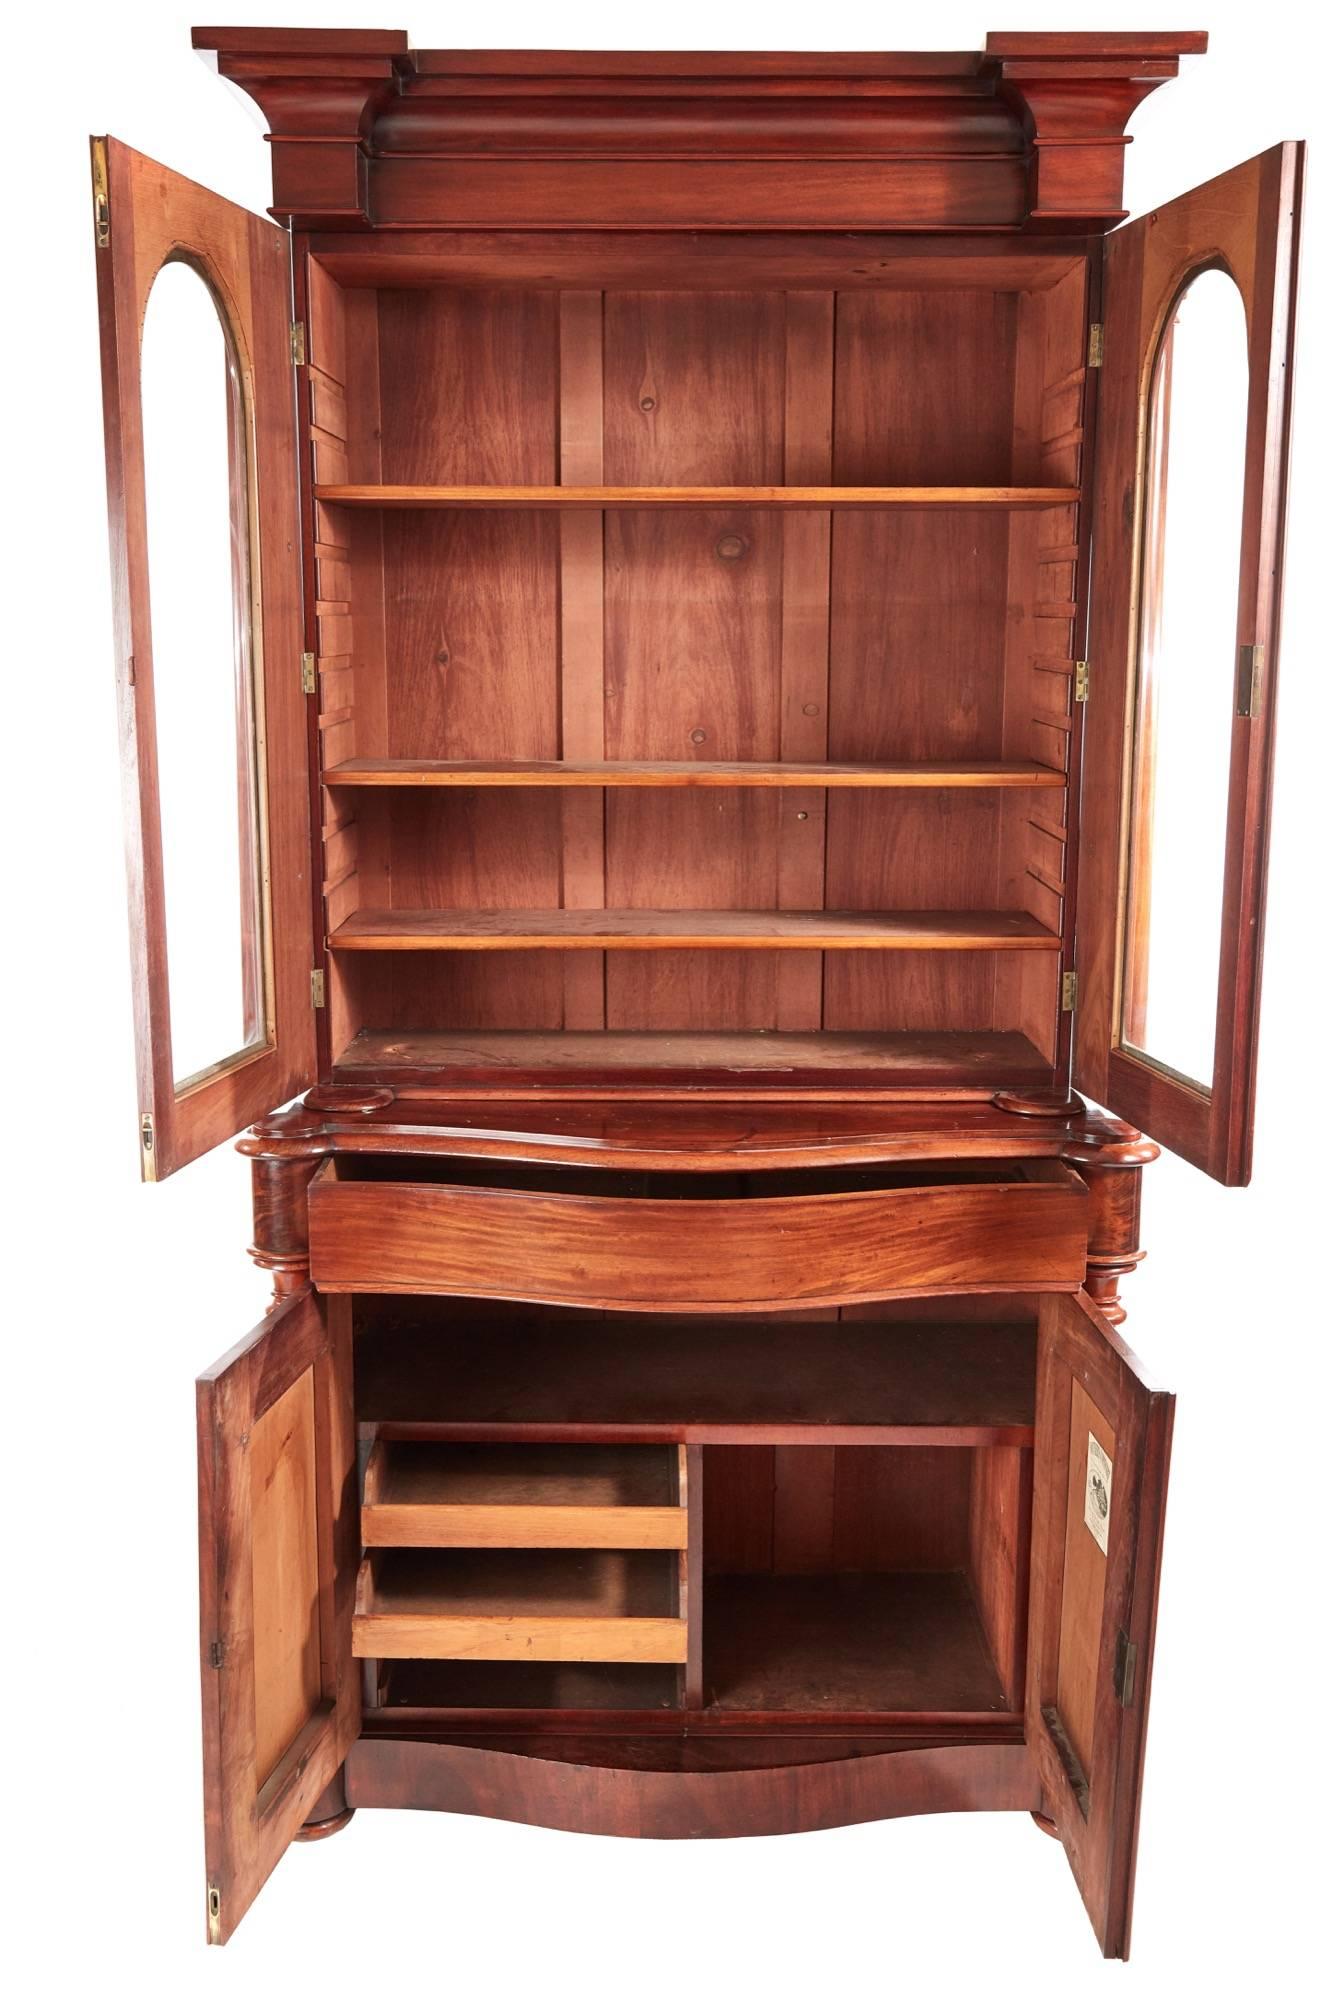 Quality Victorian mahogany bookcase, the upper section having a shaped cornice over a pair of glazed doors with shaped mouldings and turned columns, the doors open to reveal an interior with adjustable shelves, the base having a serpentine shaped